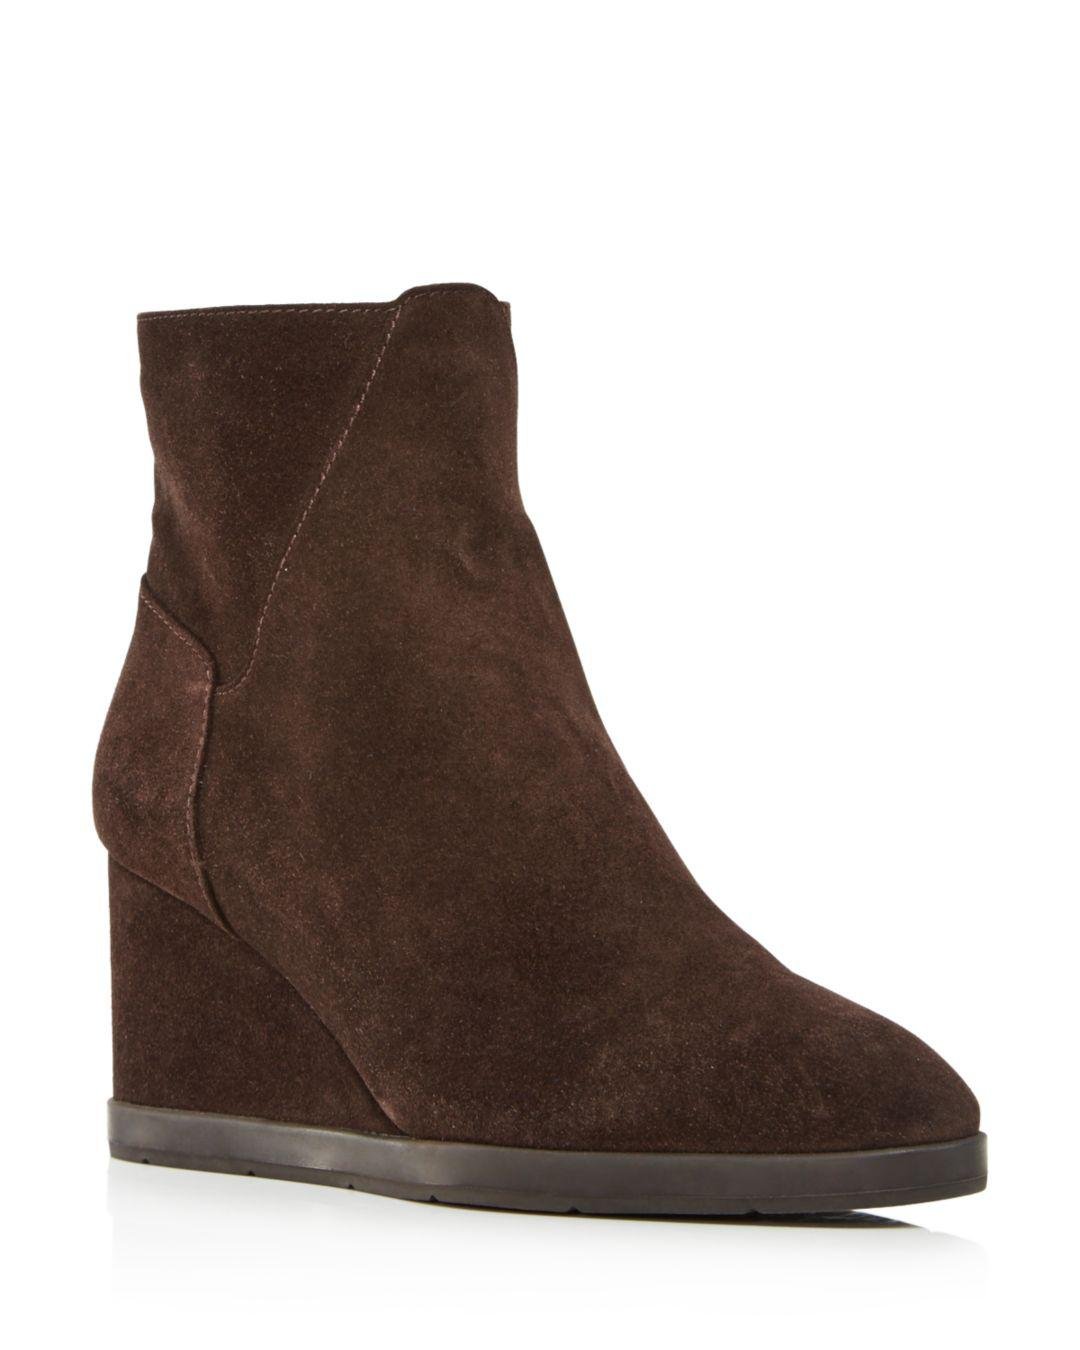 Leather Judy Suede Wedge Ankle Booties 